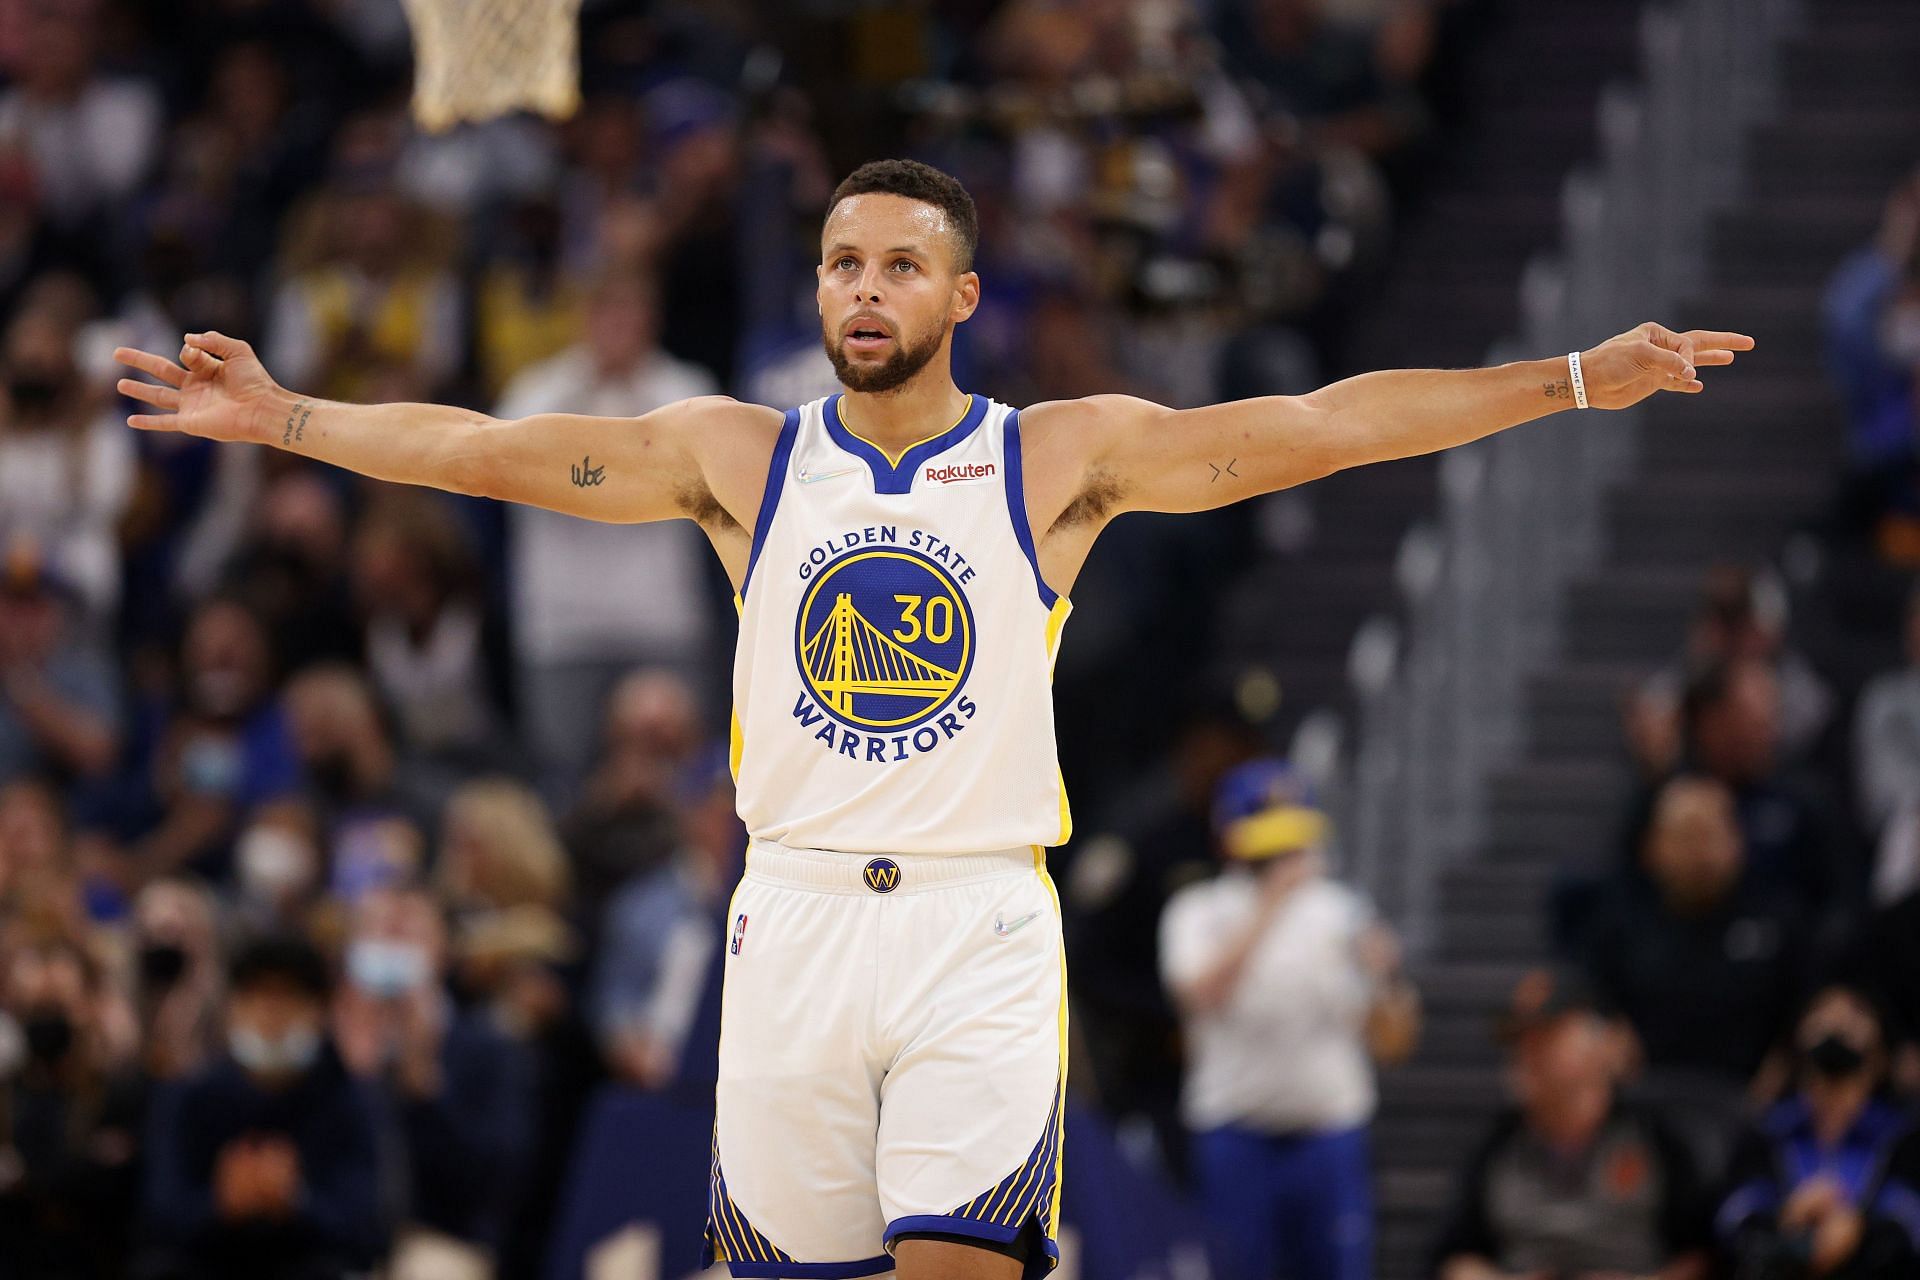 Stephen Curry #30 of the Golden State Warriors reacts after a teammate made a basket against the Memphis Grizzlies during the first half at Chase Center on October 28, 2021 in San Francisco, California.